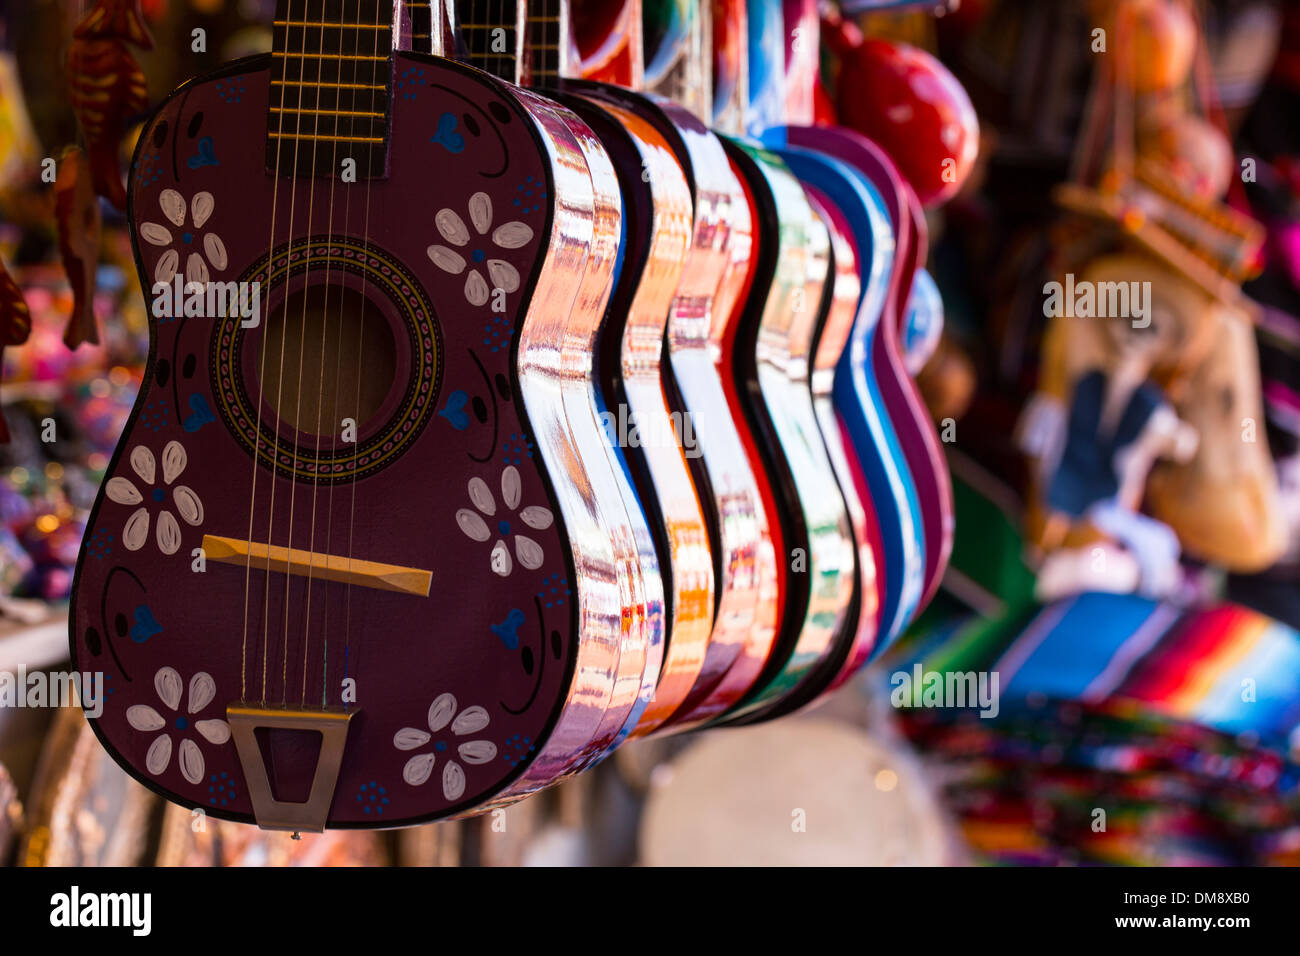 Hand painted Mexican guitars Stock Photo